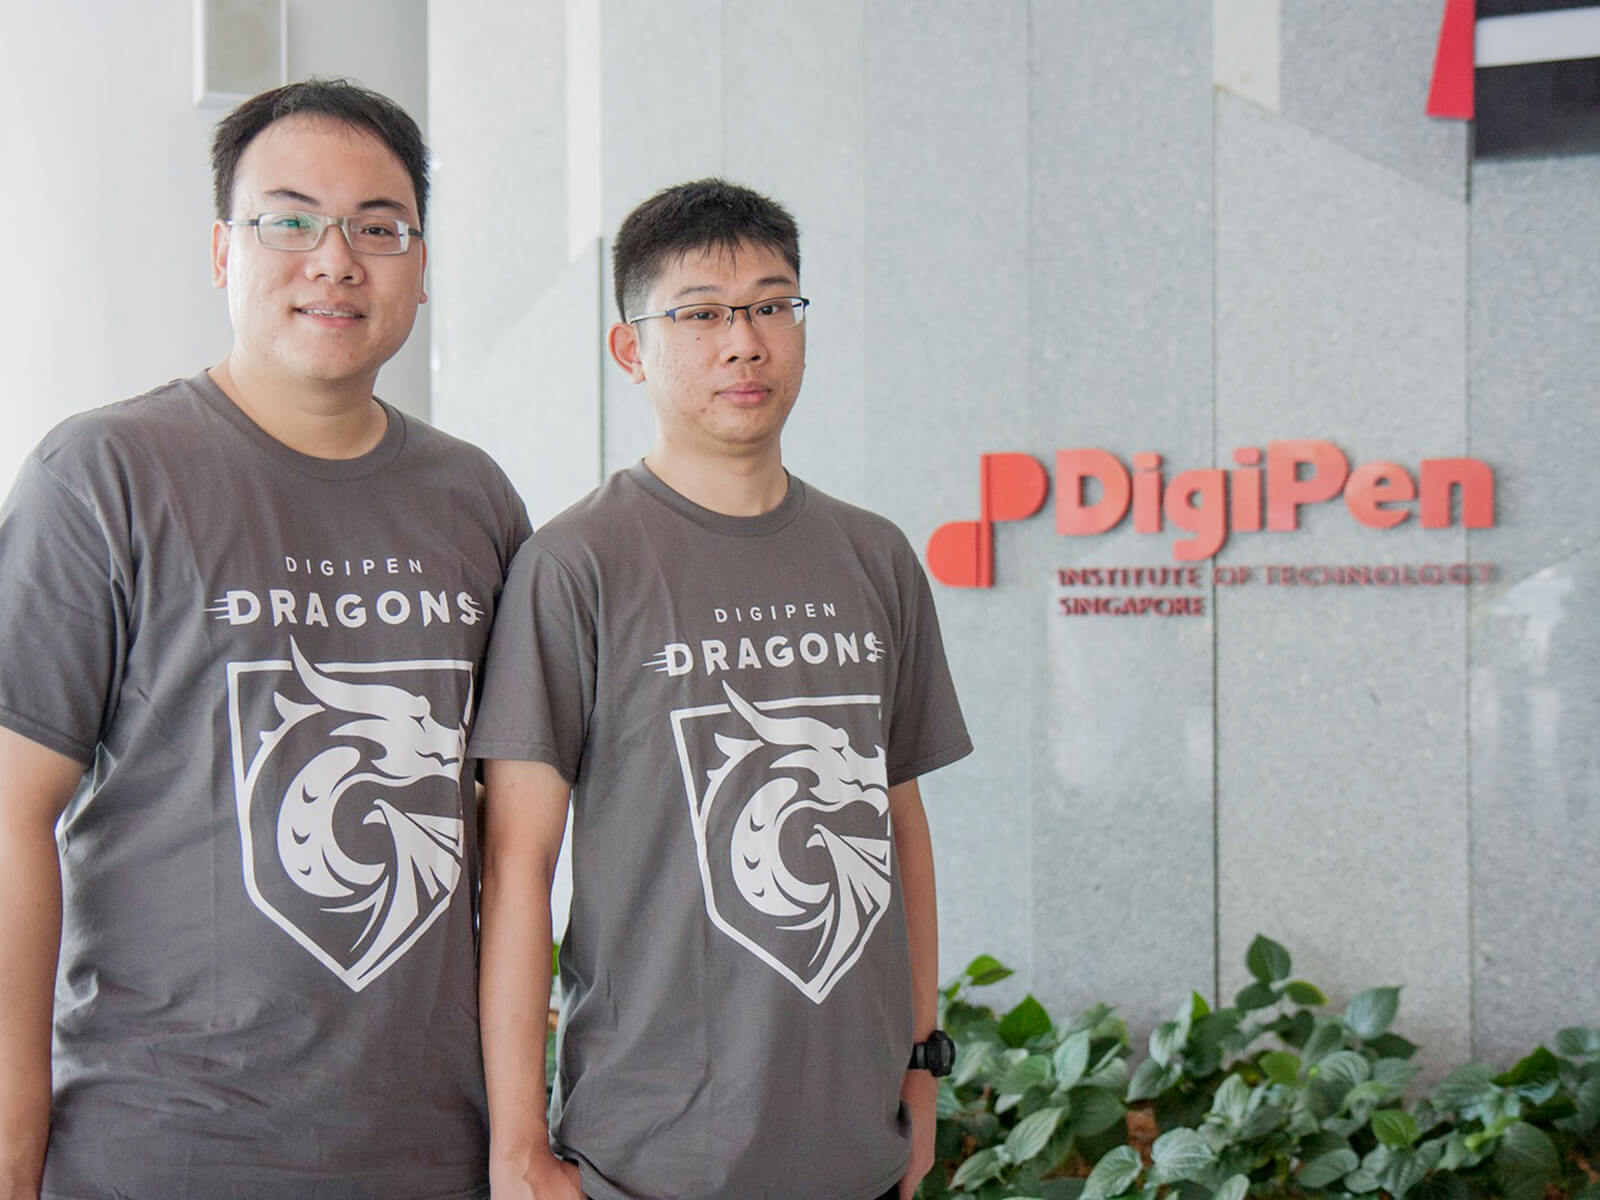 Graduates Tan Tien Wei Keith and Yap Teng Hong pose for a photo in gray DigiPen Dragons t-shirts next to the DigiPen building